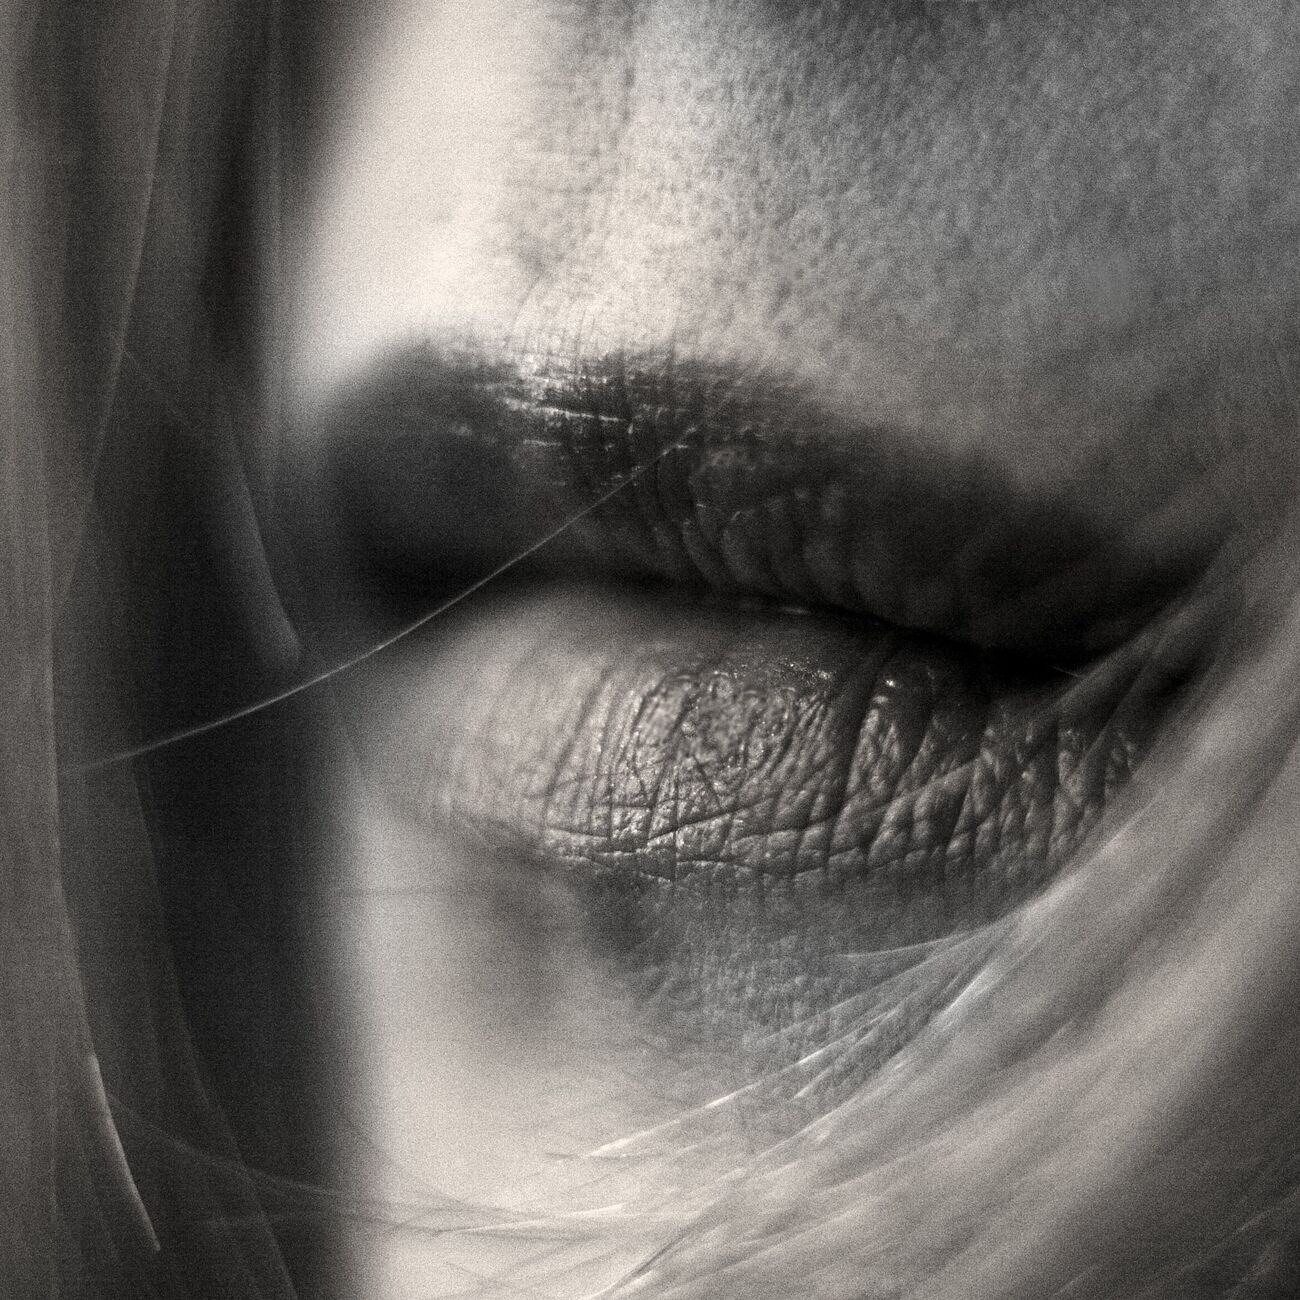 Get a 9.1 x 9.1 in, Sweet on her lips. Ref-580-3 - Denis Olivier Art Photography